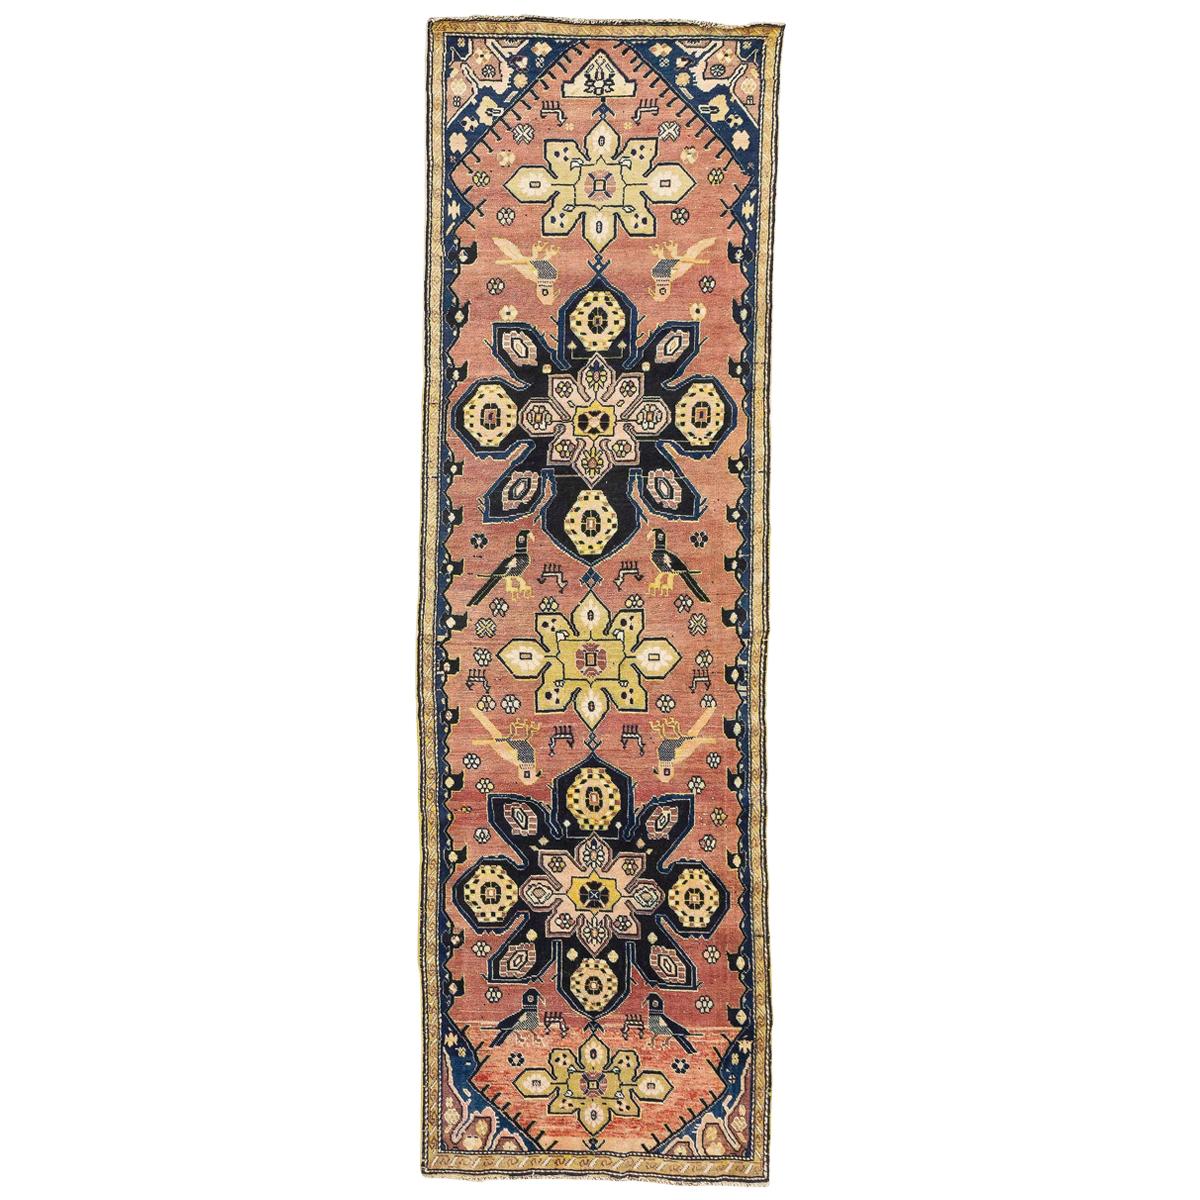 20th Century Persian Karabagh Rug with Colorful Floral & Avian Patterns For Sale